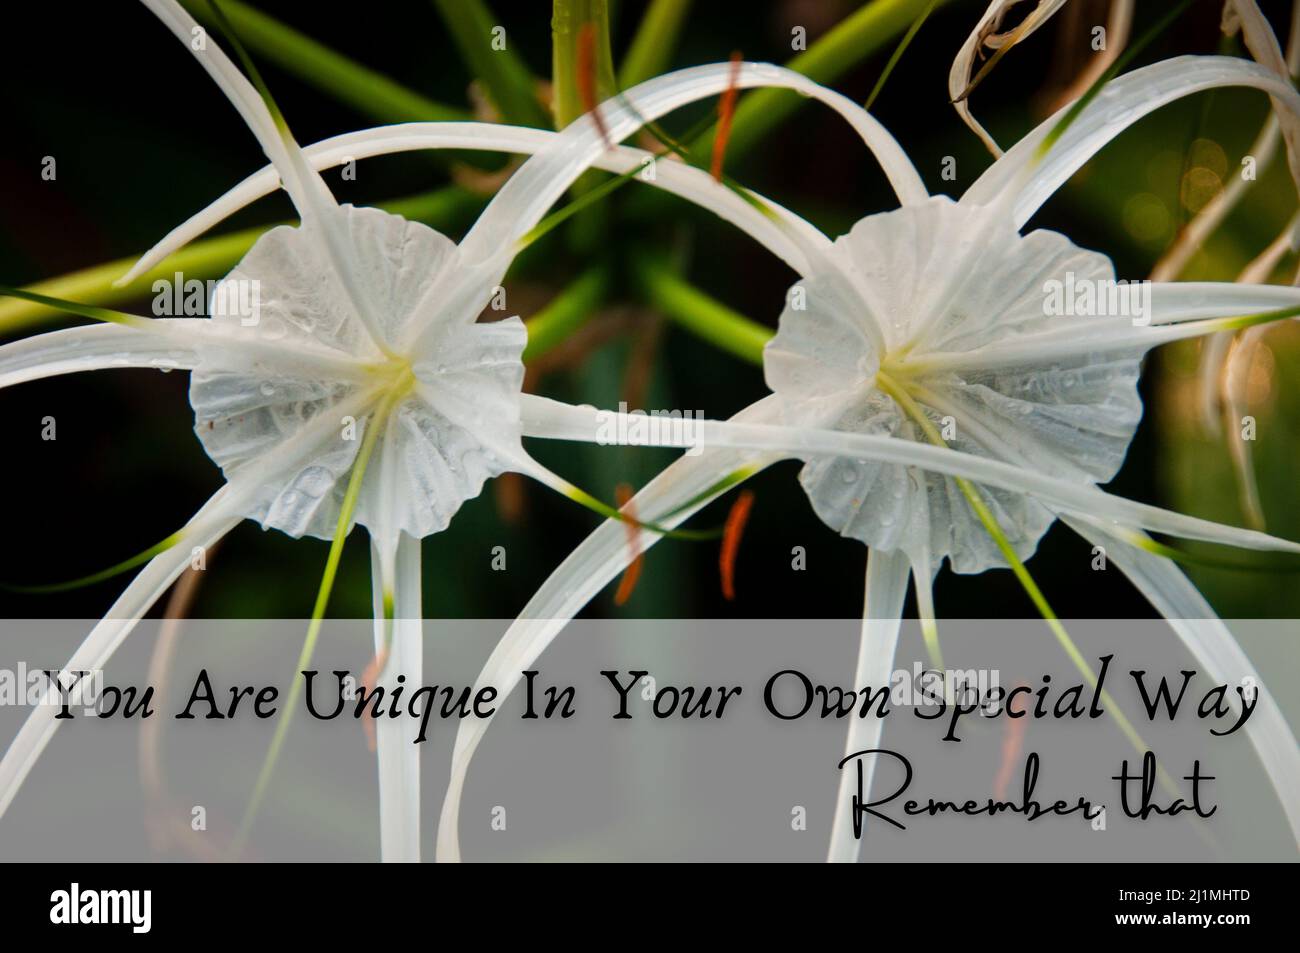 Motivational and inpirational quote - You are unique in your own special way. With white flowers and blurred nature background. Motivational concept Stock Photo